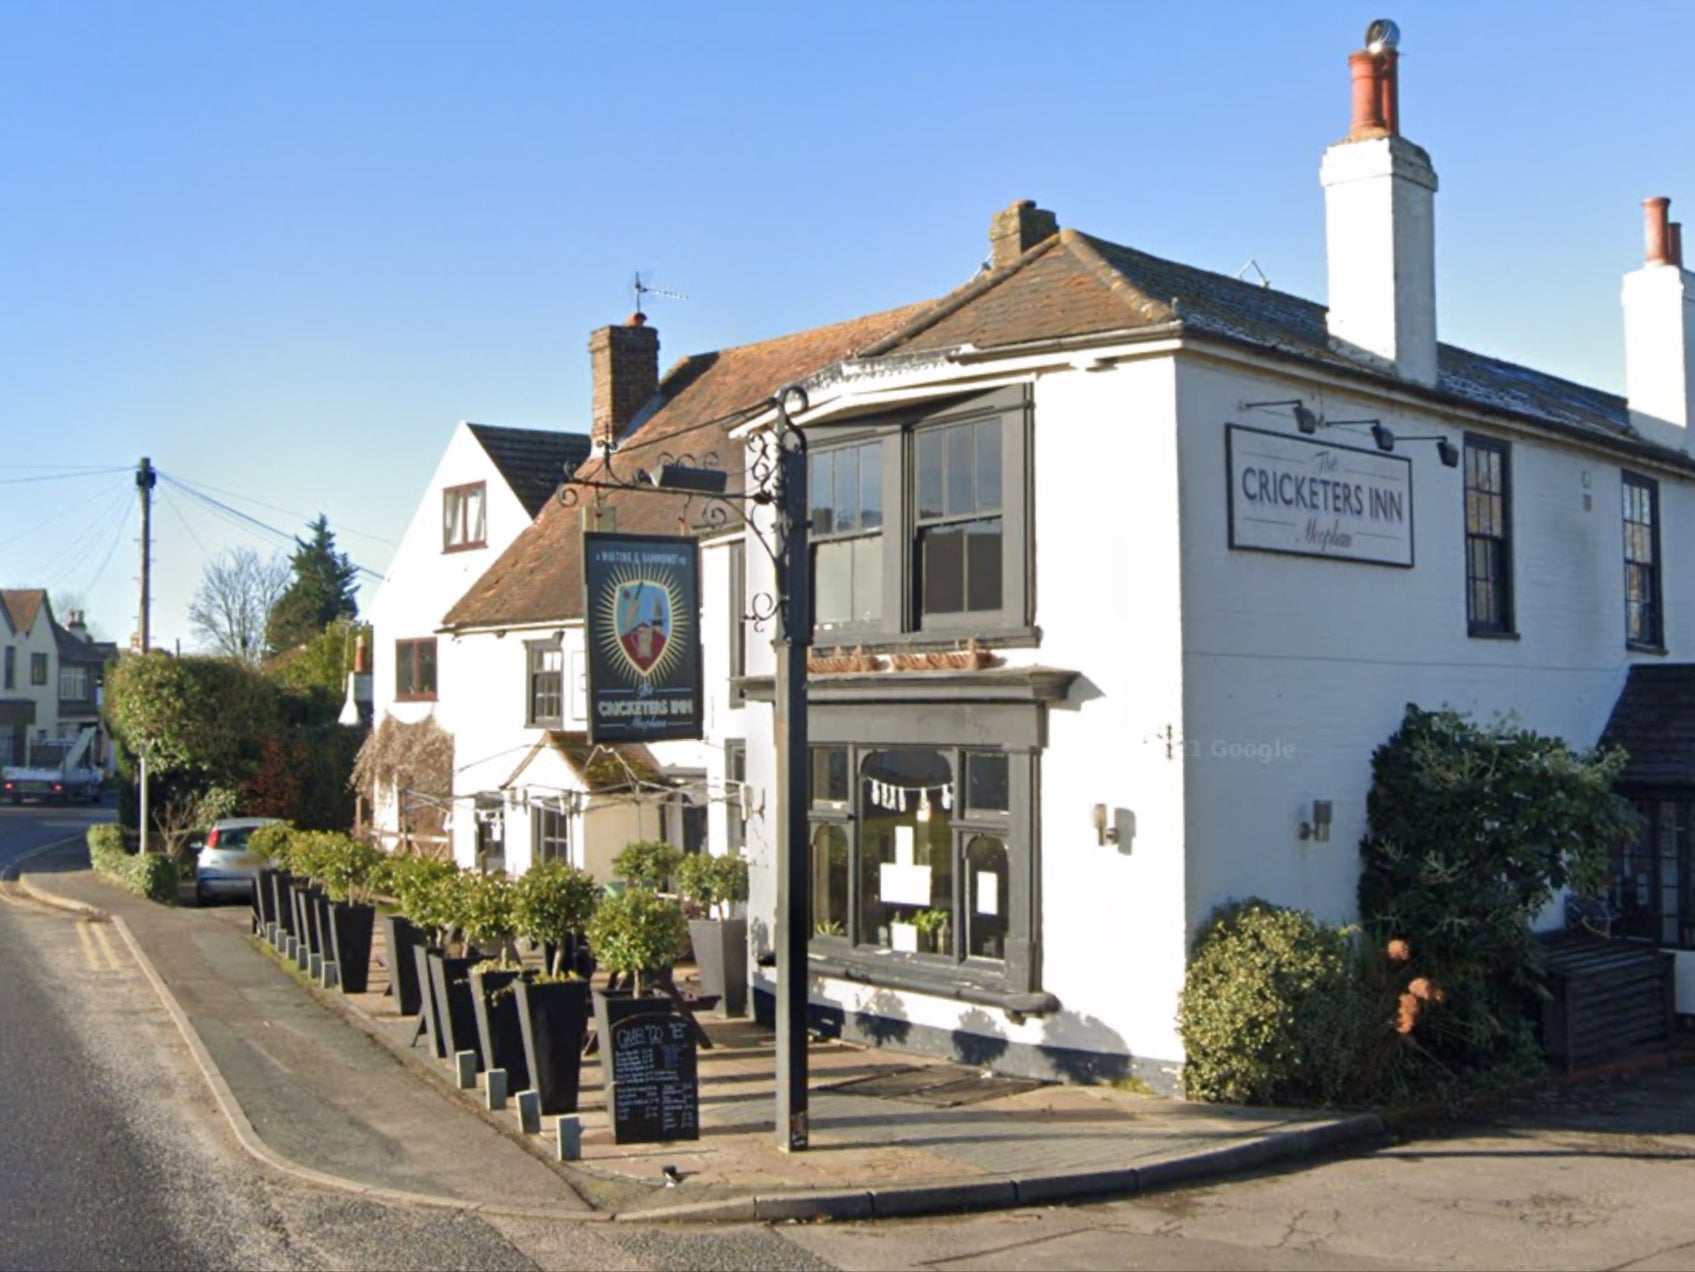 The Cricketers Inn in Meopham, near Gravesend in Kent, where the incident took place